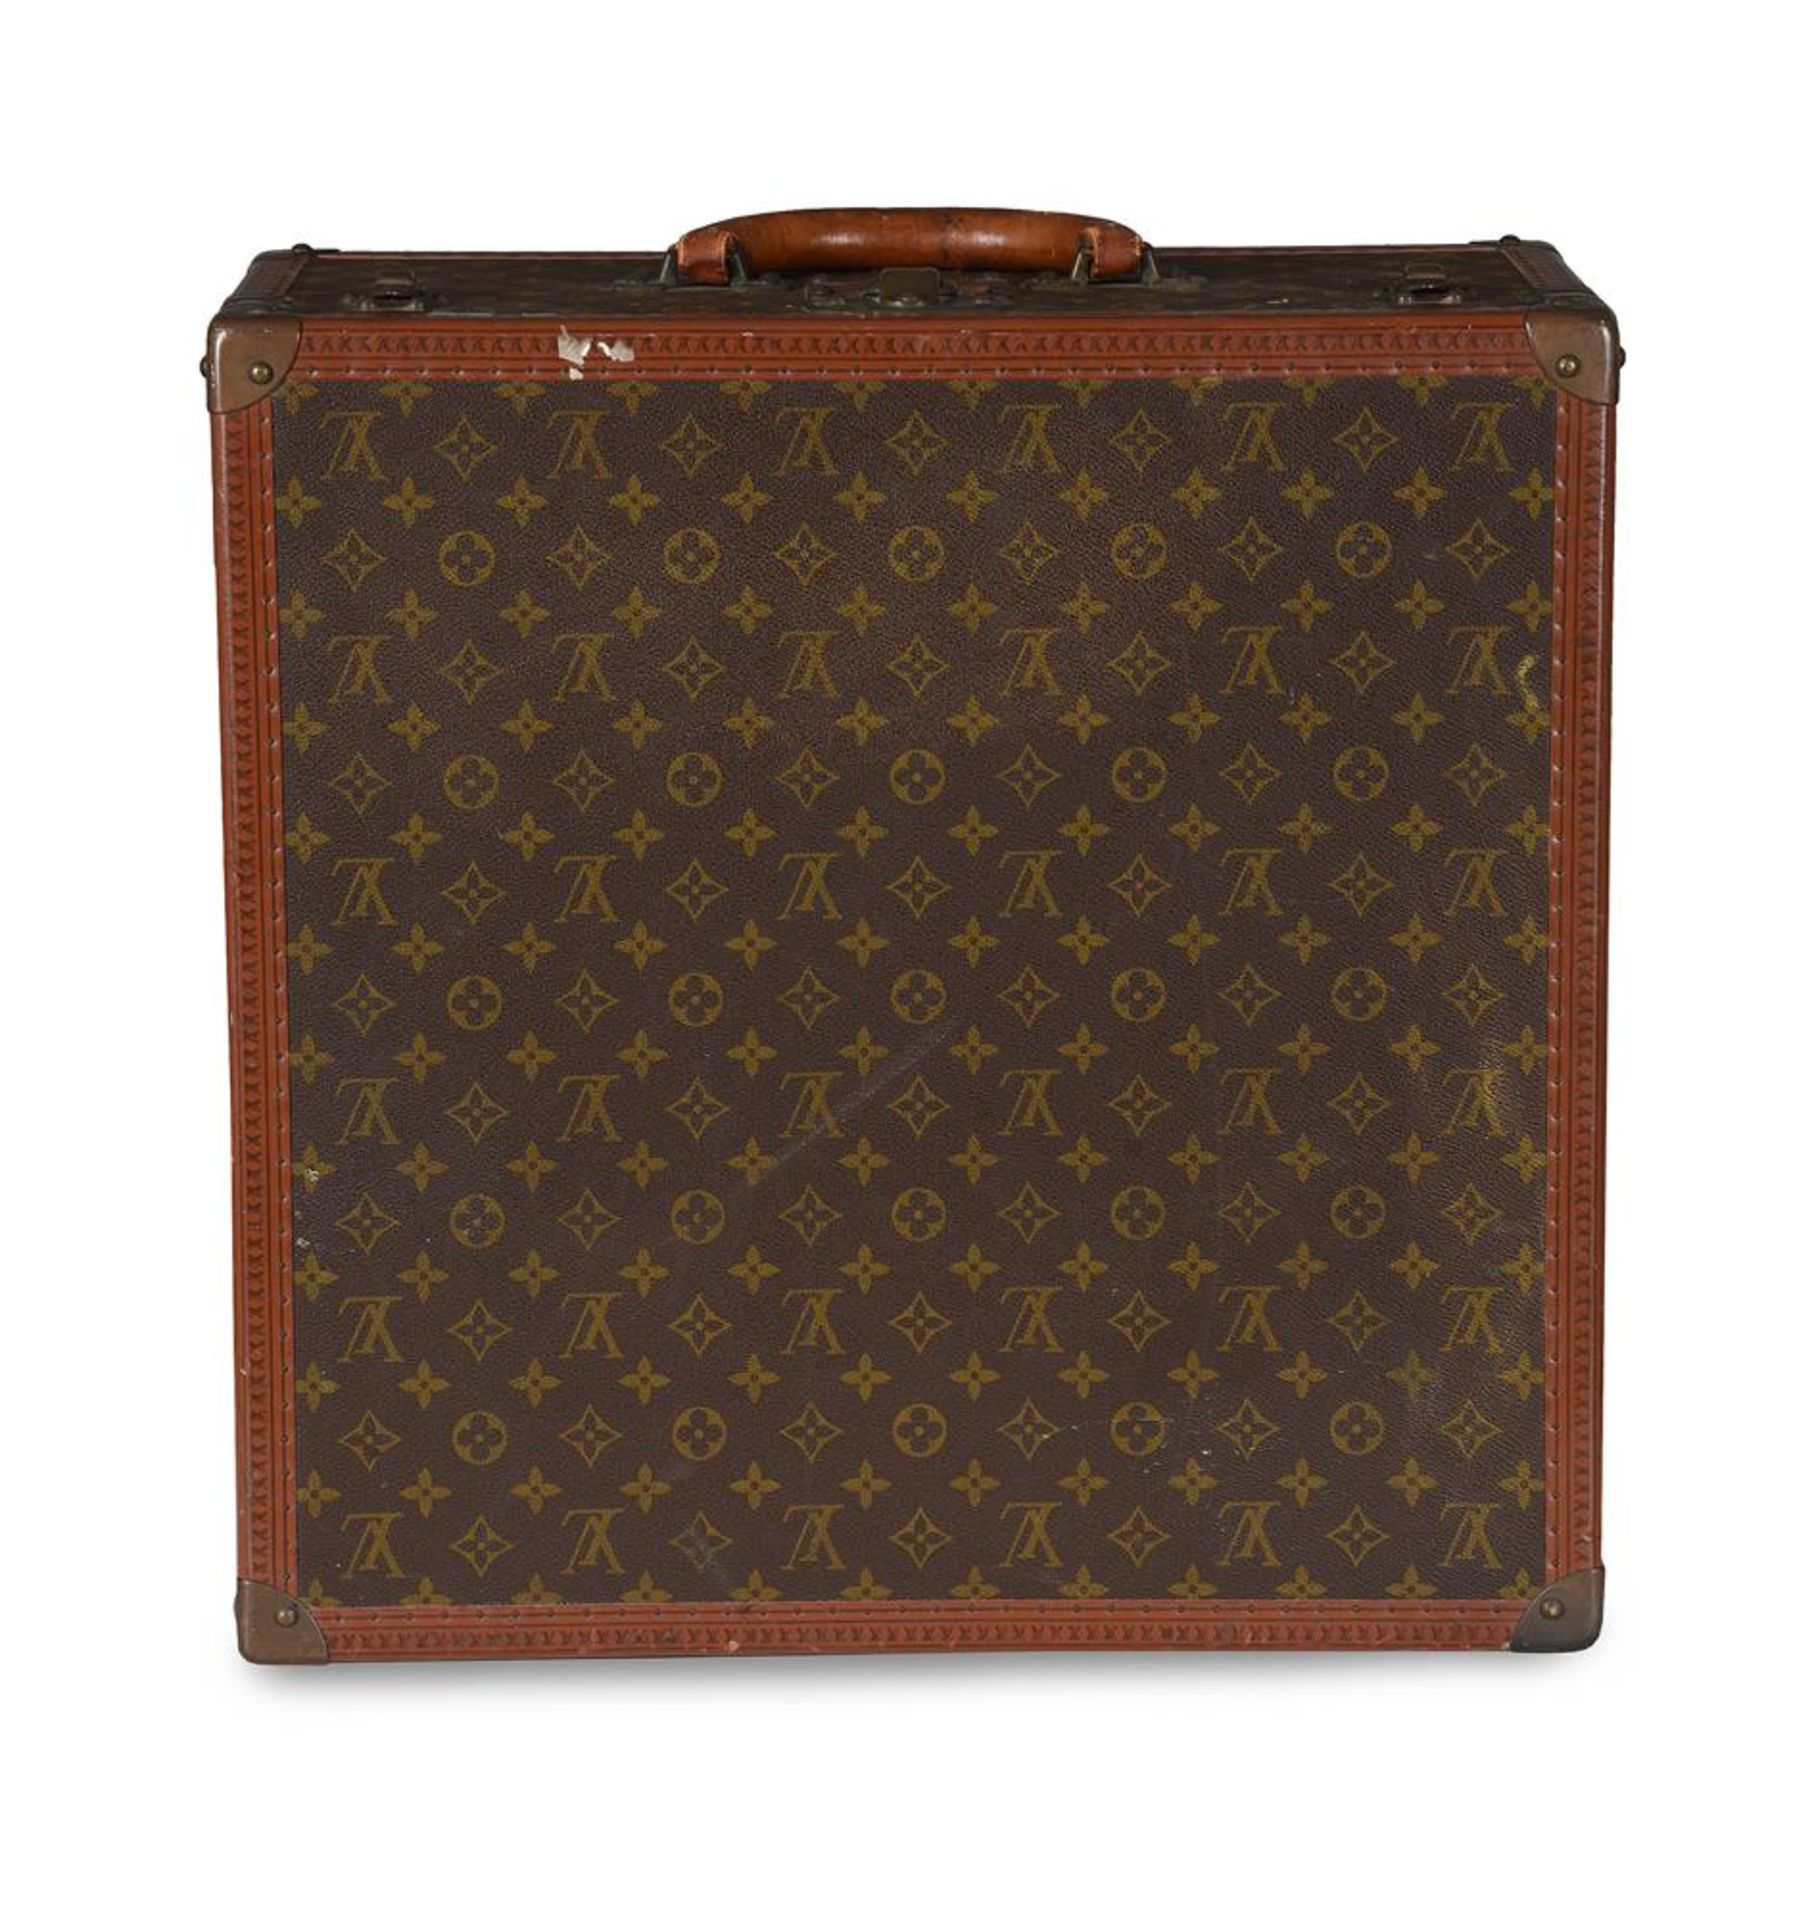 LOUIS VUITTON, A MONOGRAMMED COATED CANVAS HARD TRAVELLING CASE - Image 2 of 6